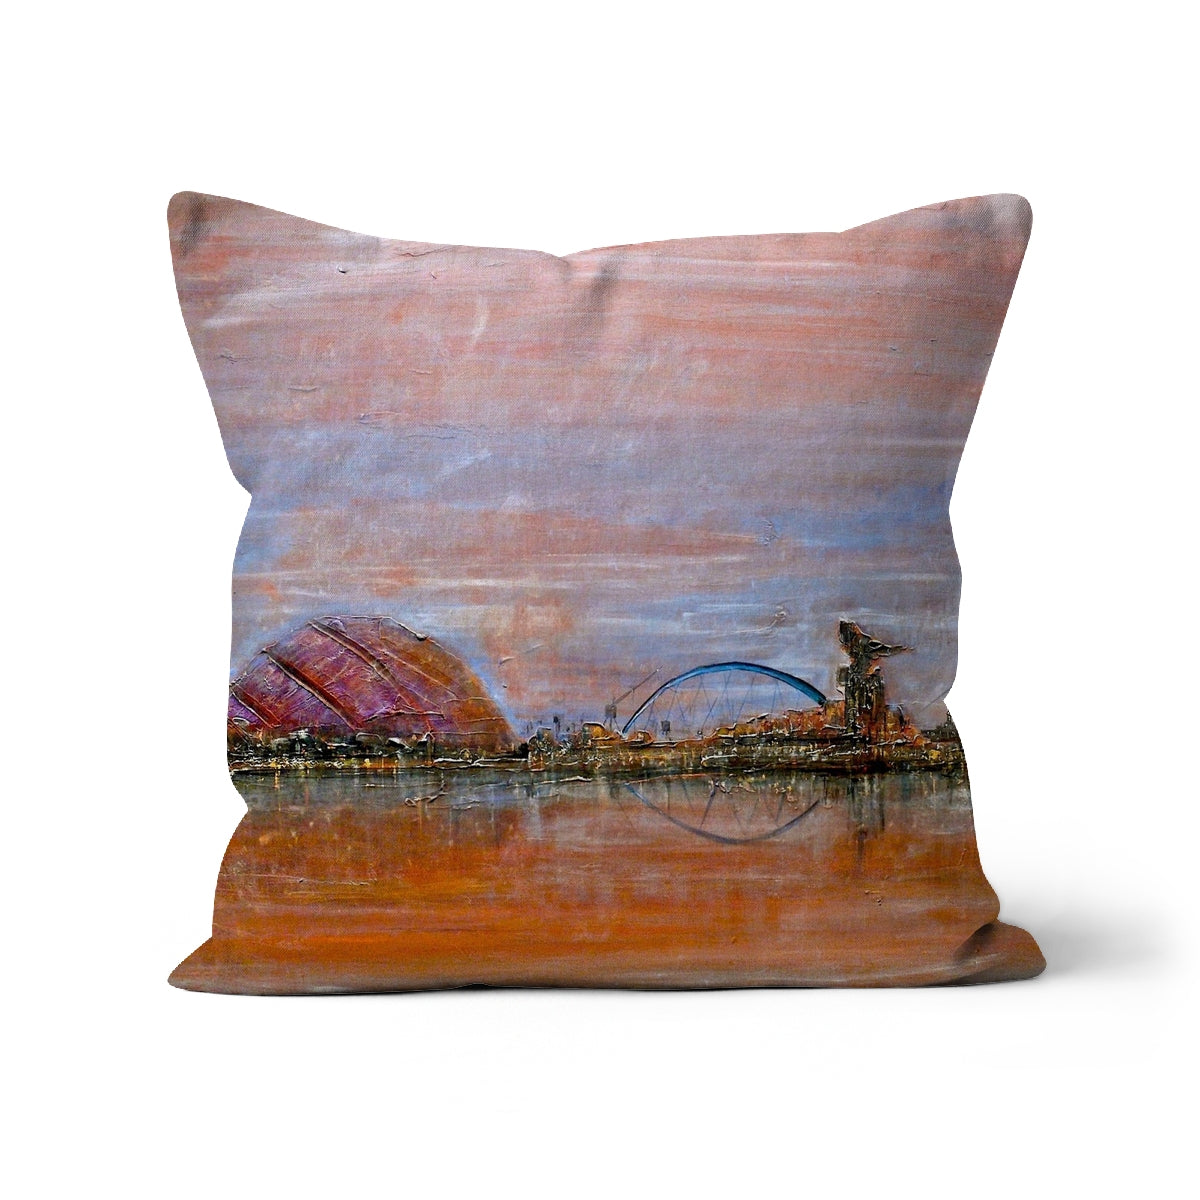 Glasgow Harbour Art Gifts Cushion-Cushions-Edinburgh & Glasgow Art Gallery-Faux Suede-12"x12"-Paintings, Prints, Homeware, Art Gifts From Scotland By Scottish Artist Kevin Hunter